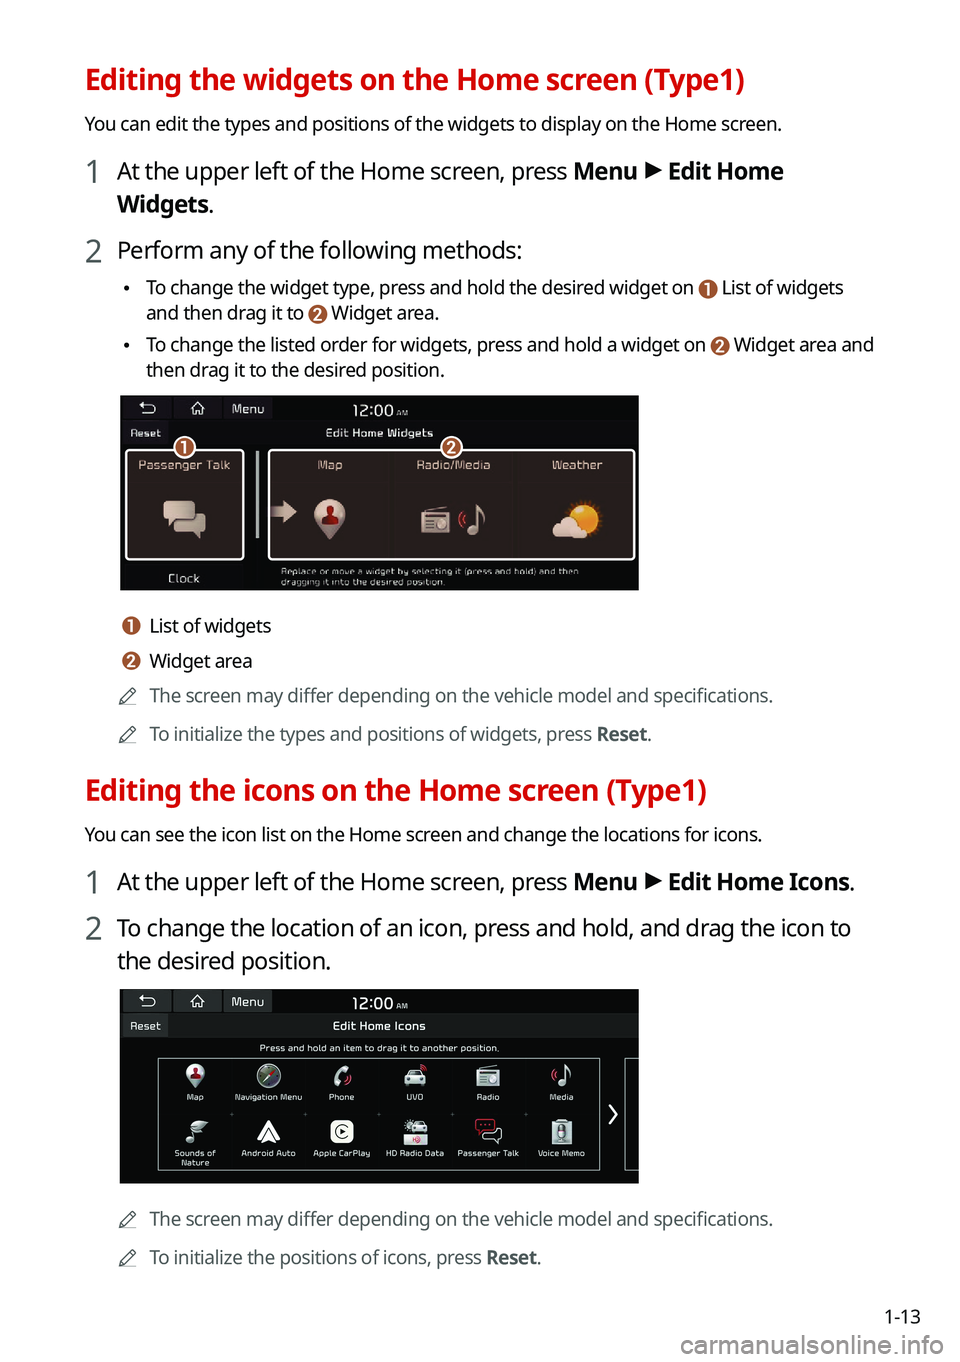 KIA SOUL 2022  Navigation System Quick Reference Guide 1-13
Editing the widgets on the Home screen (Type1)
You can edit the types and positions of the widgets to display on the Home screen.
1 At the upper left of the Home screen, press Menu >
 Edit Home 
